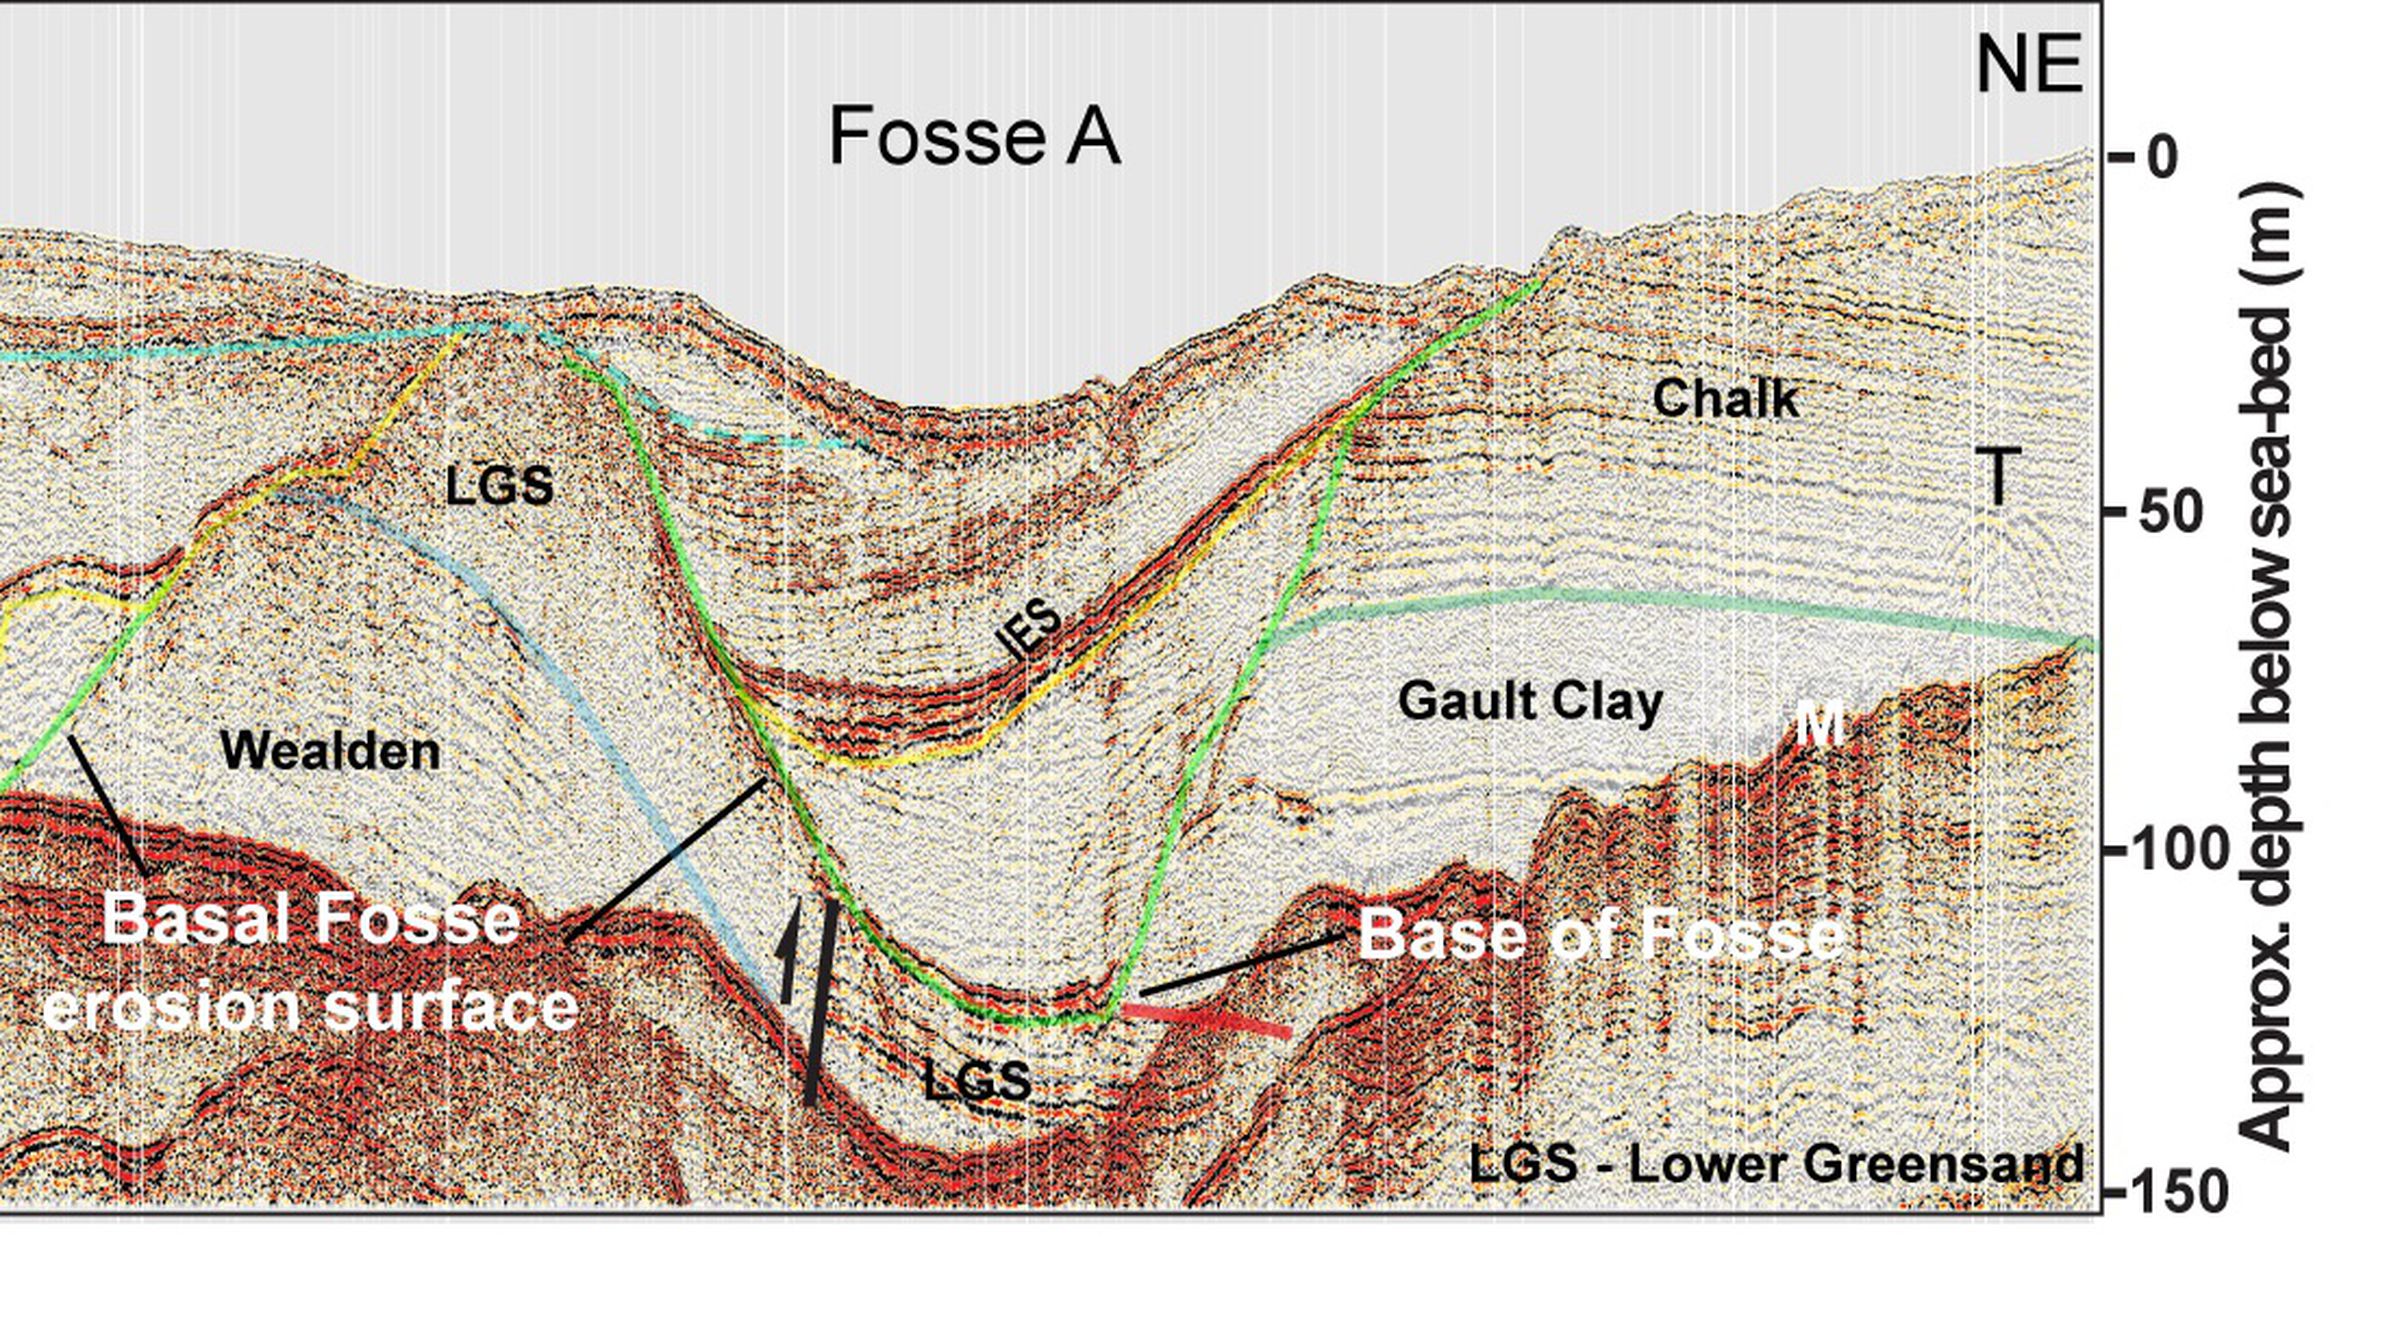 A cross-section through the subsurface in Dover Strait area shows what researchers think is an ancient plunge pool, now filled with sediments.